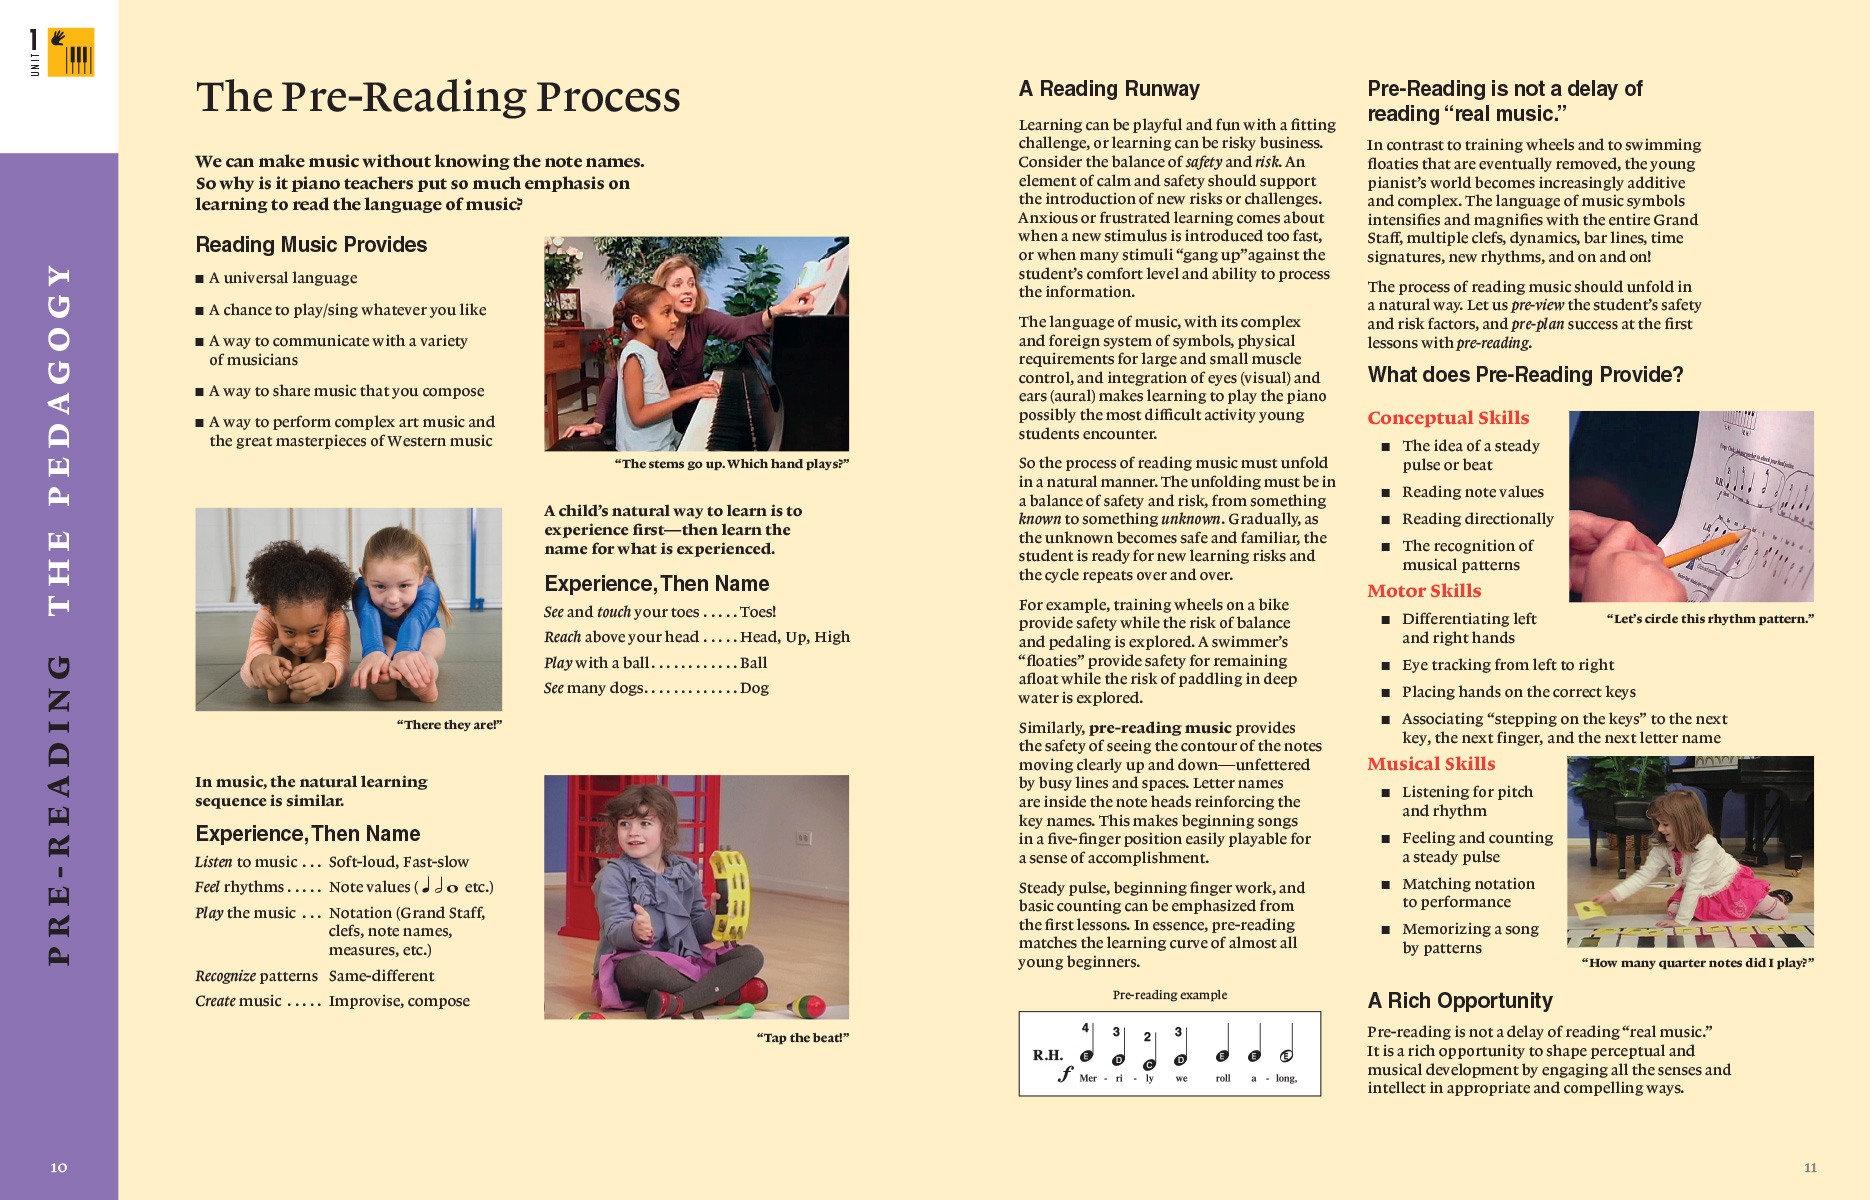 Note Reading Calendars For Your Primer Piano Students - Teach